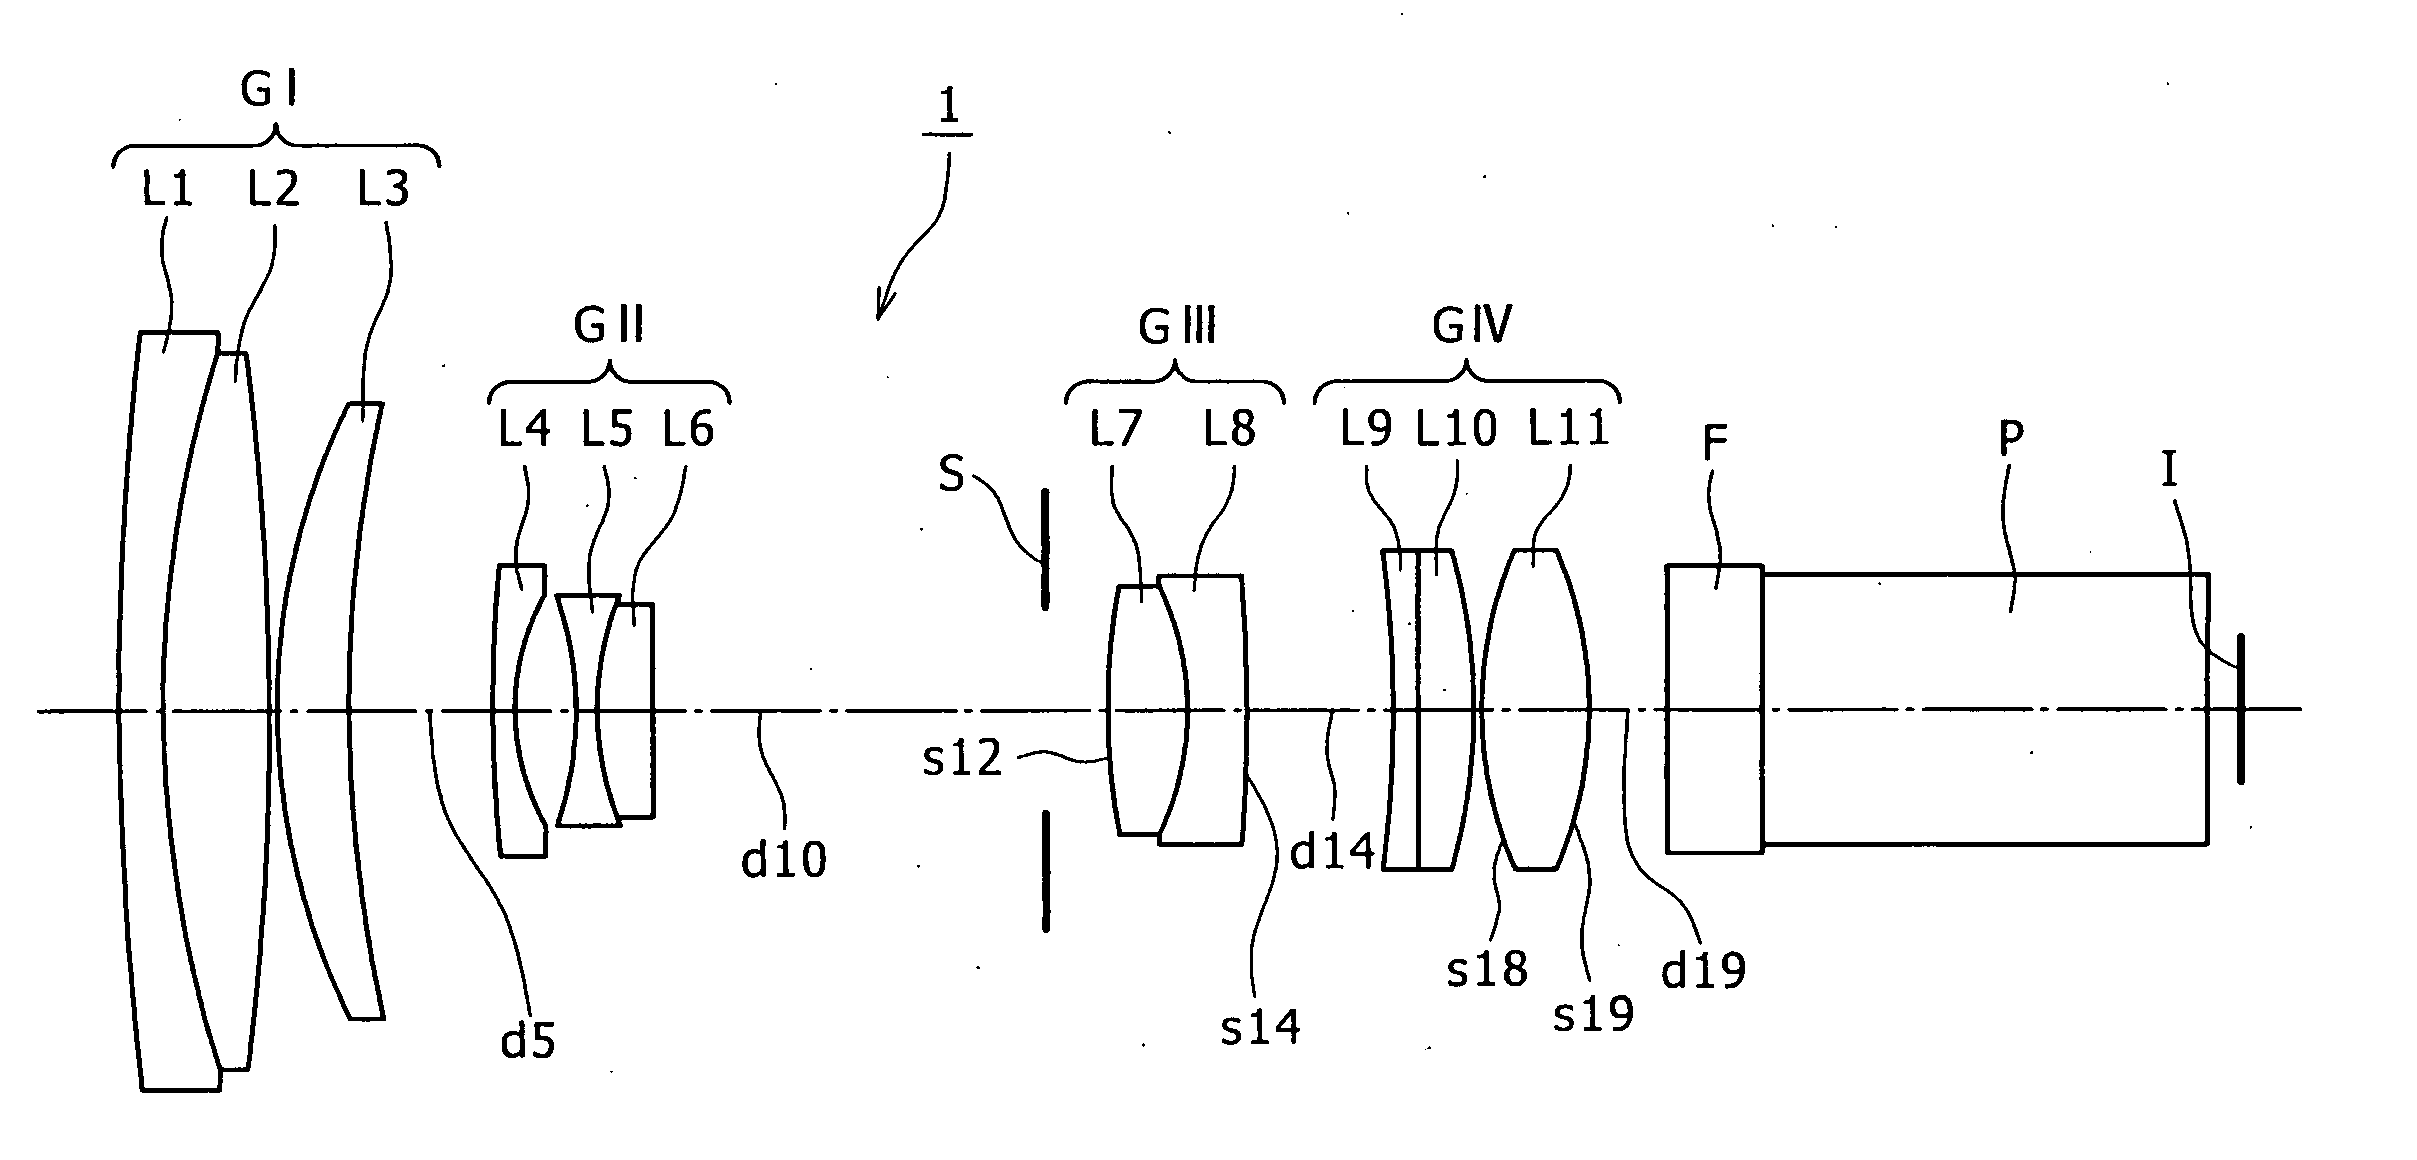 Zoom lens and image pickup apparatus